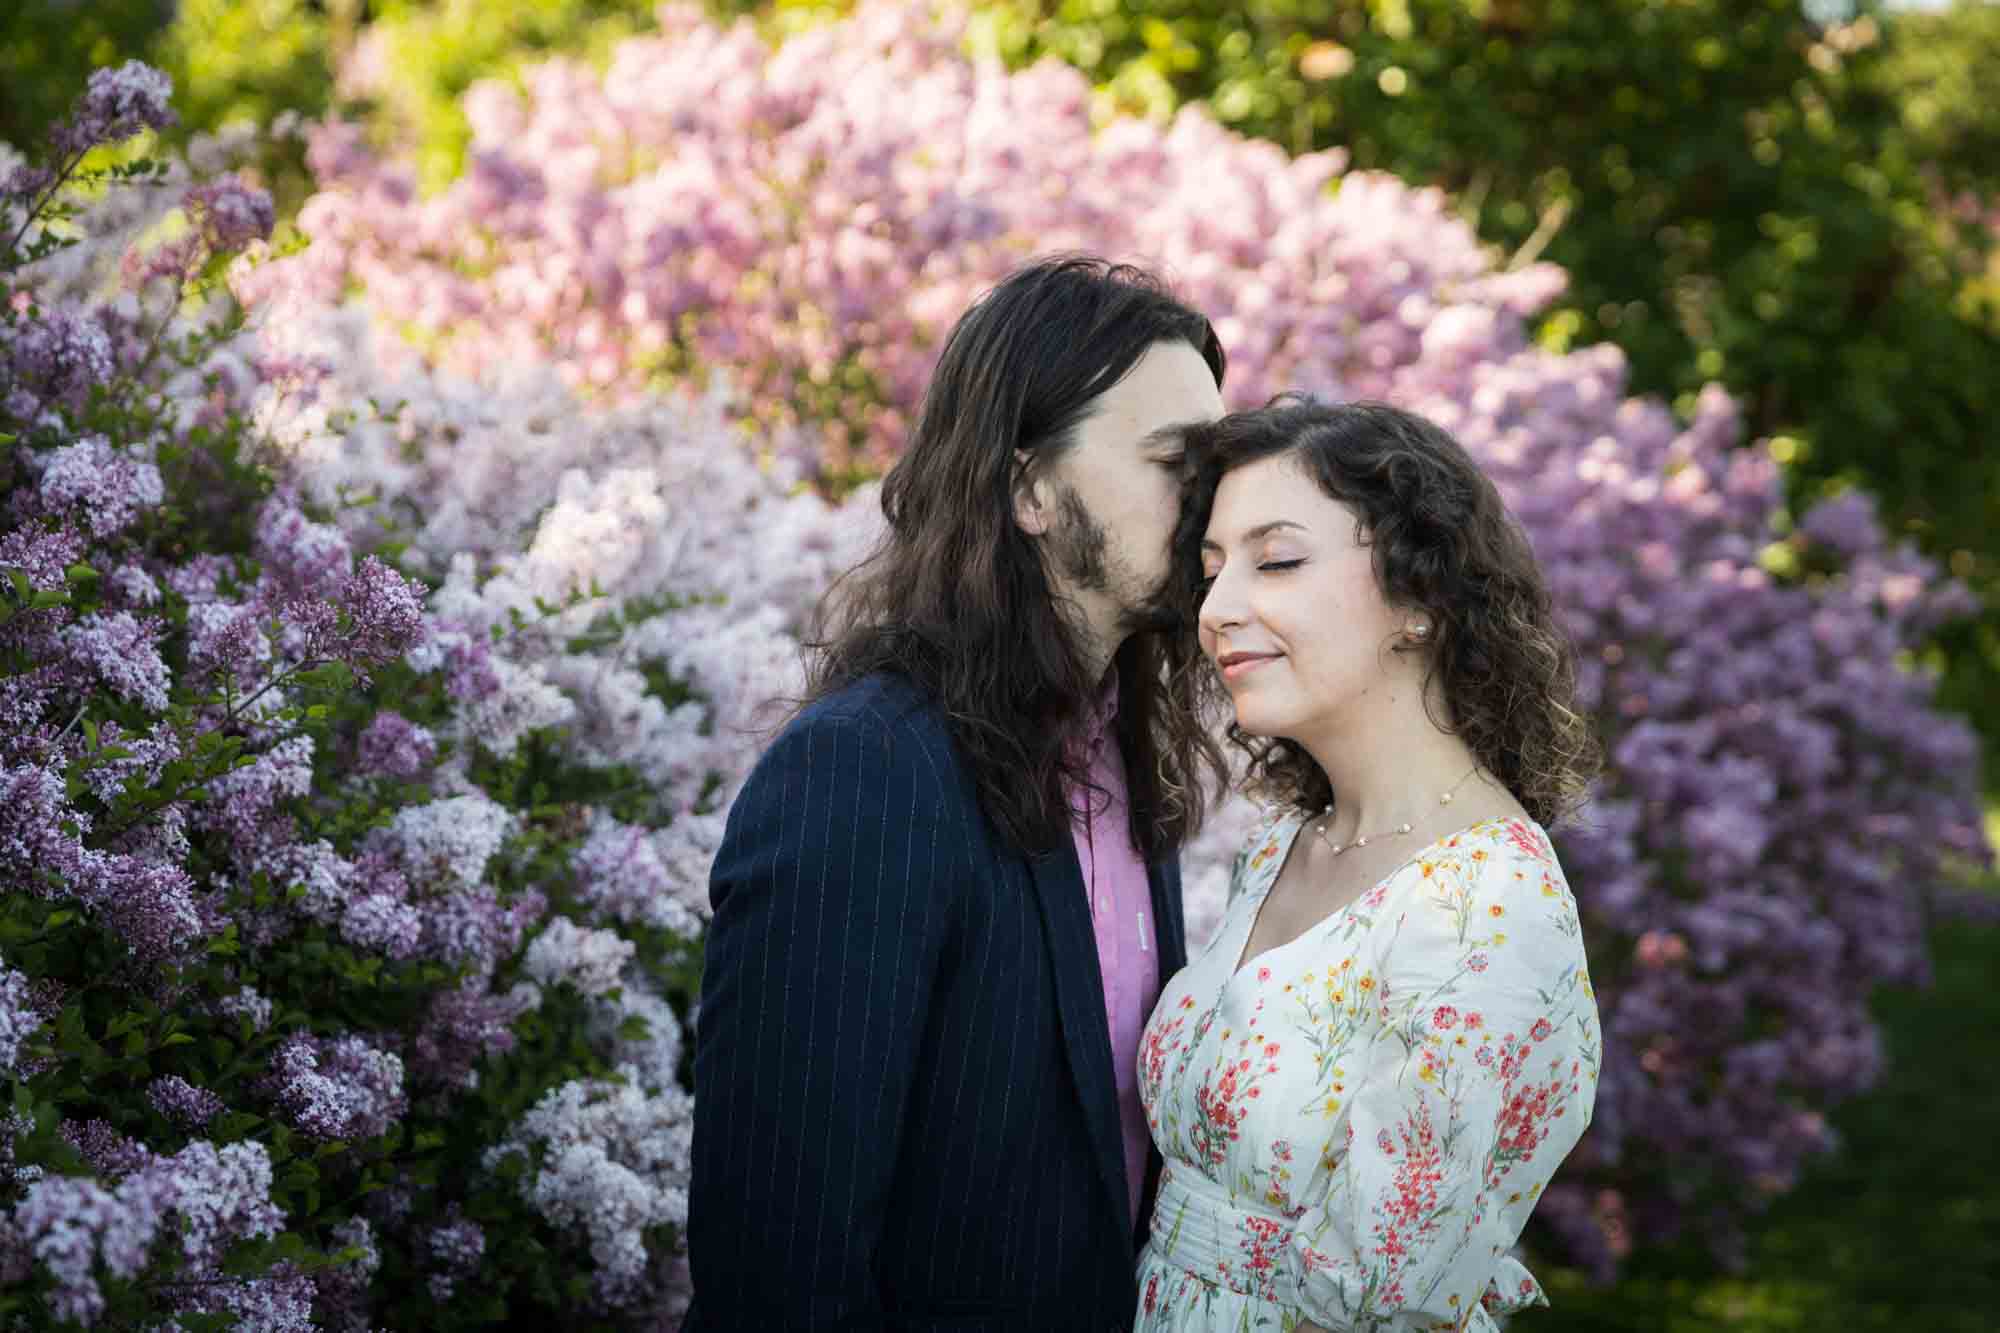 Man kissing woman on side of head in front of lilac bushes